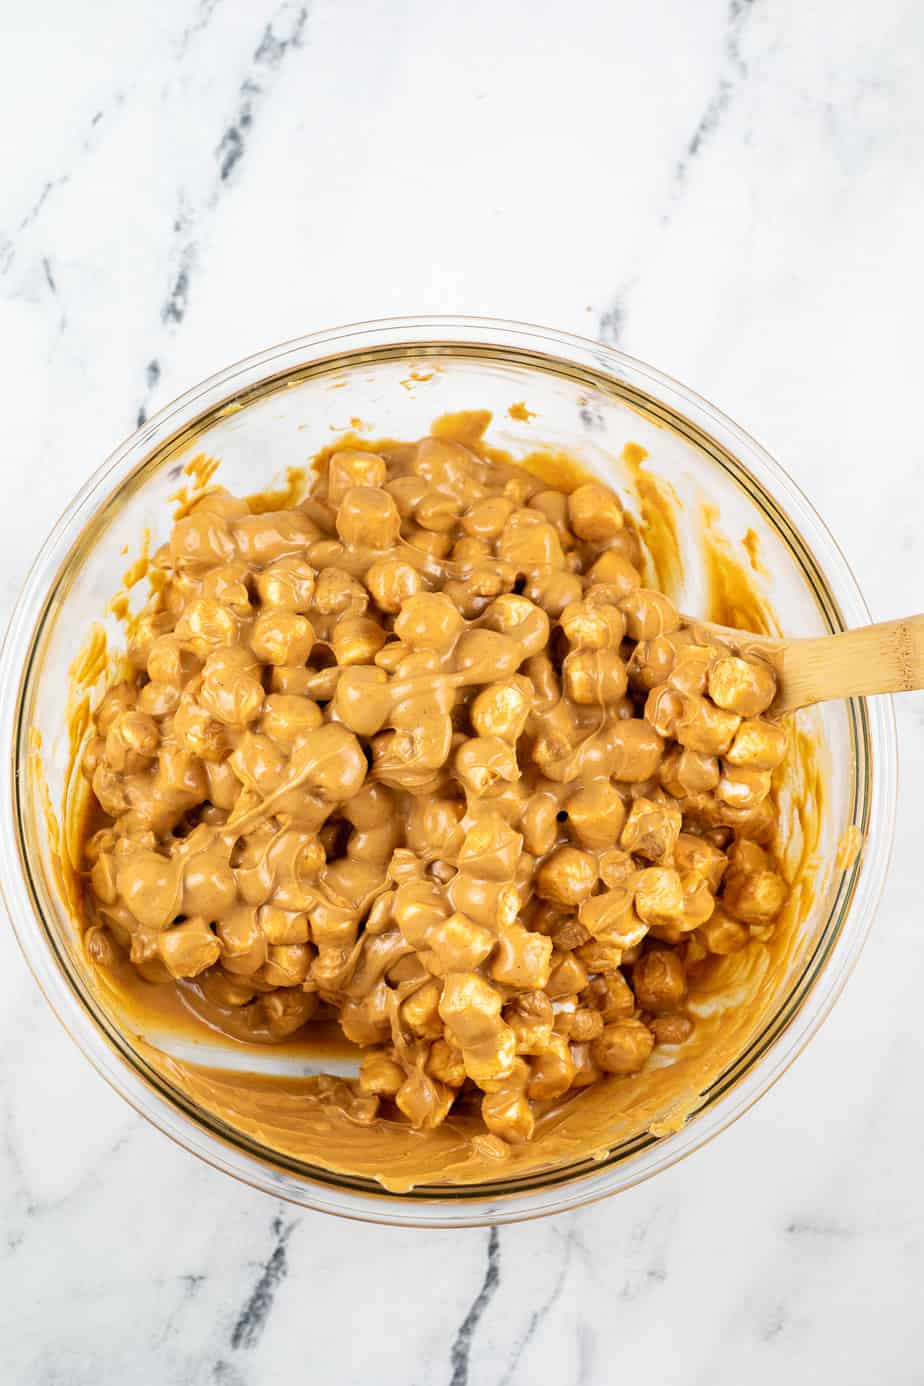 Marshmallows and peanuts being mixed into a peanut butter butterscotch sauce from above in a large mixing bowl on a counter from above.